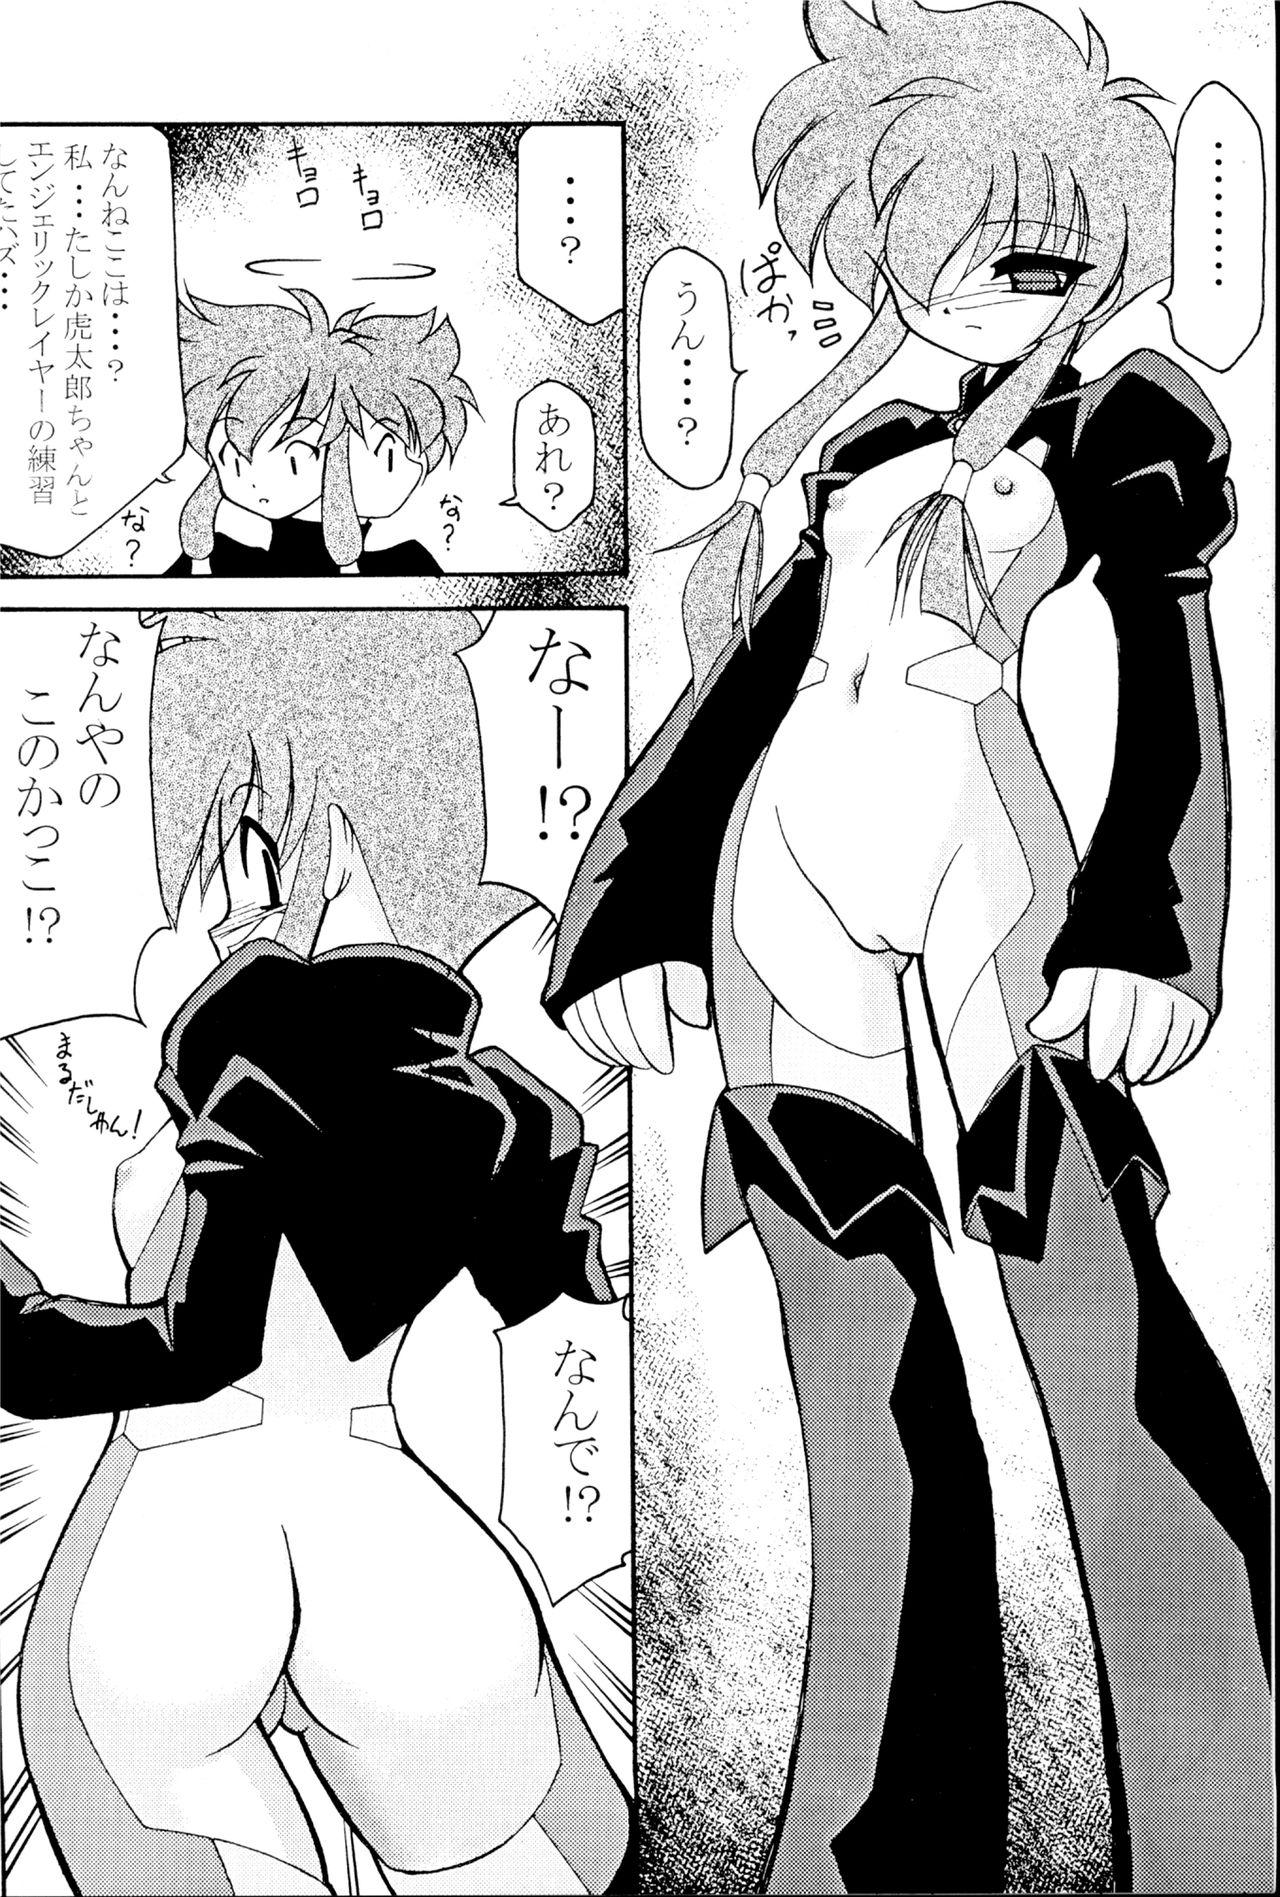 Hotel VERSUS - Magic knight rayearth Angelic layer Tugging - Page 7